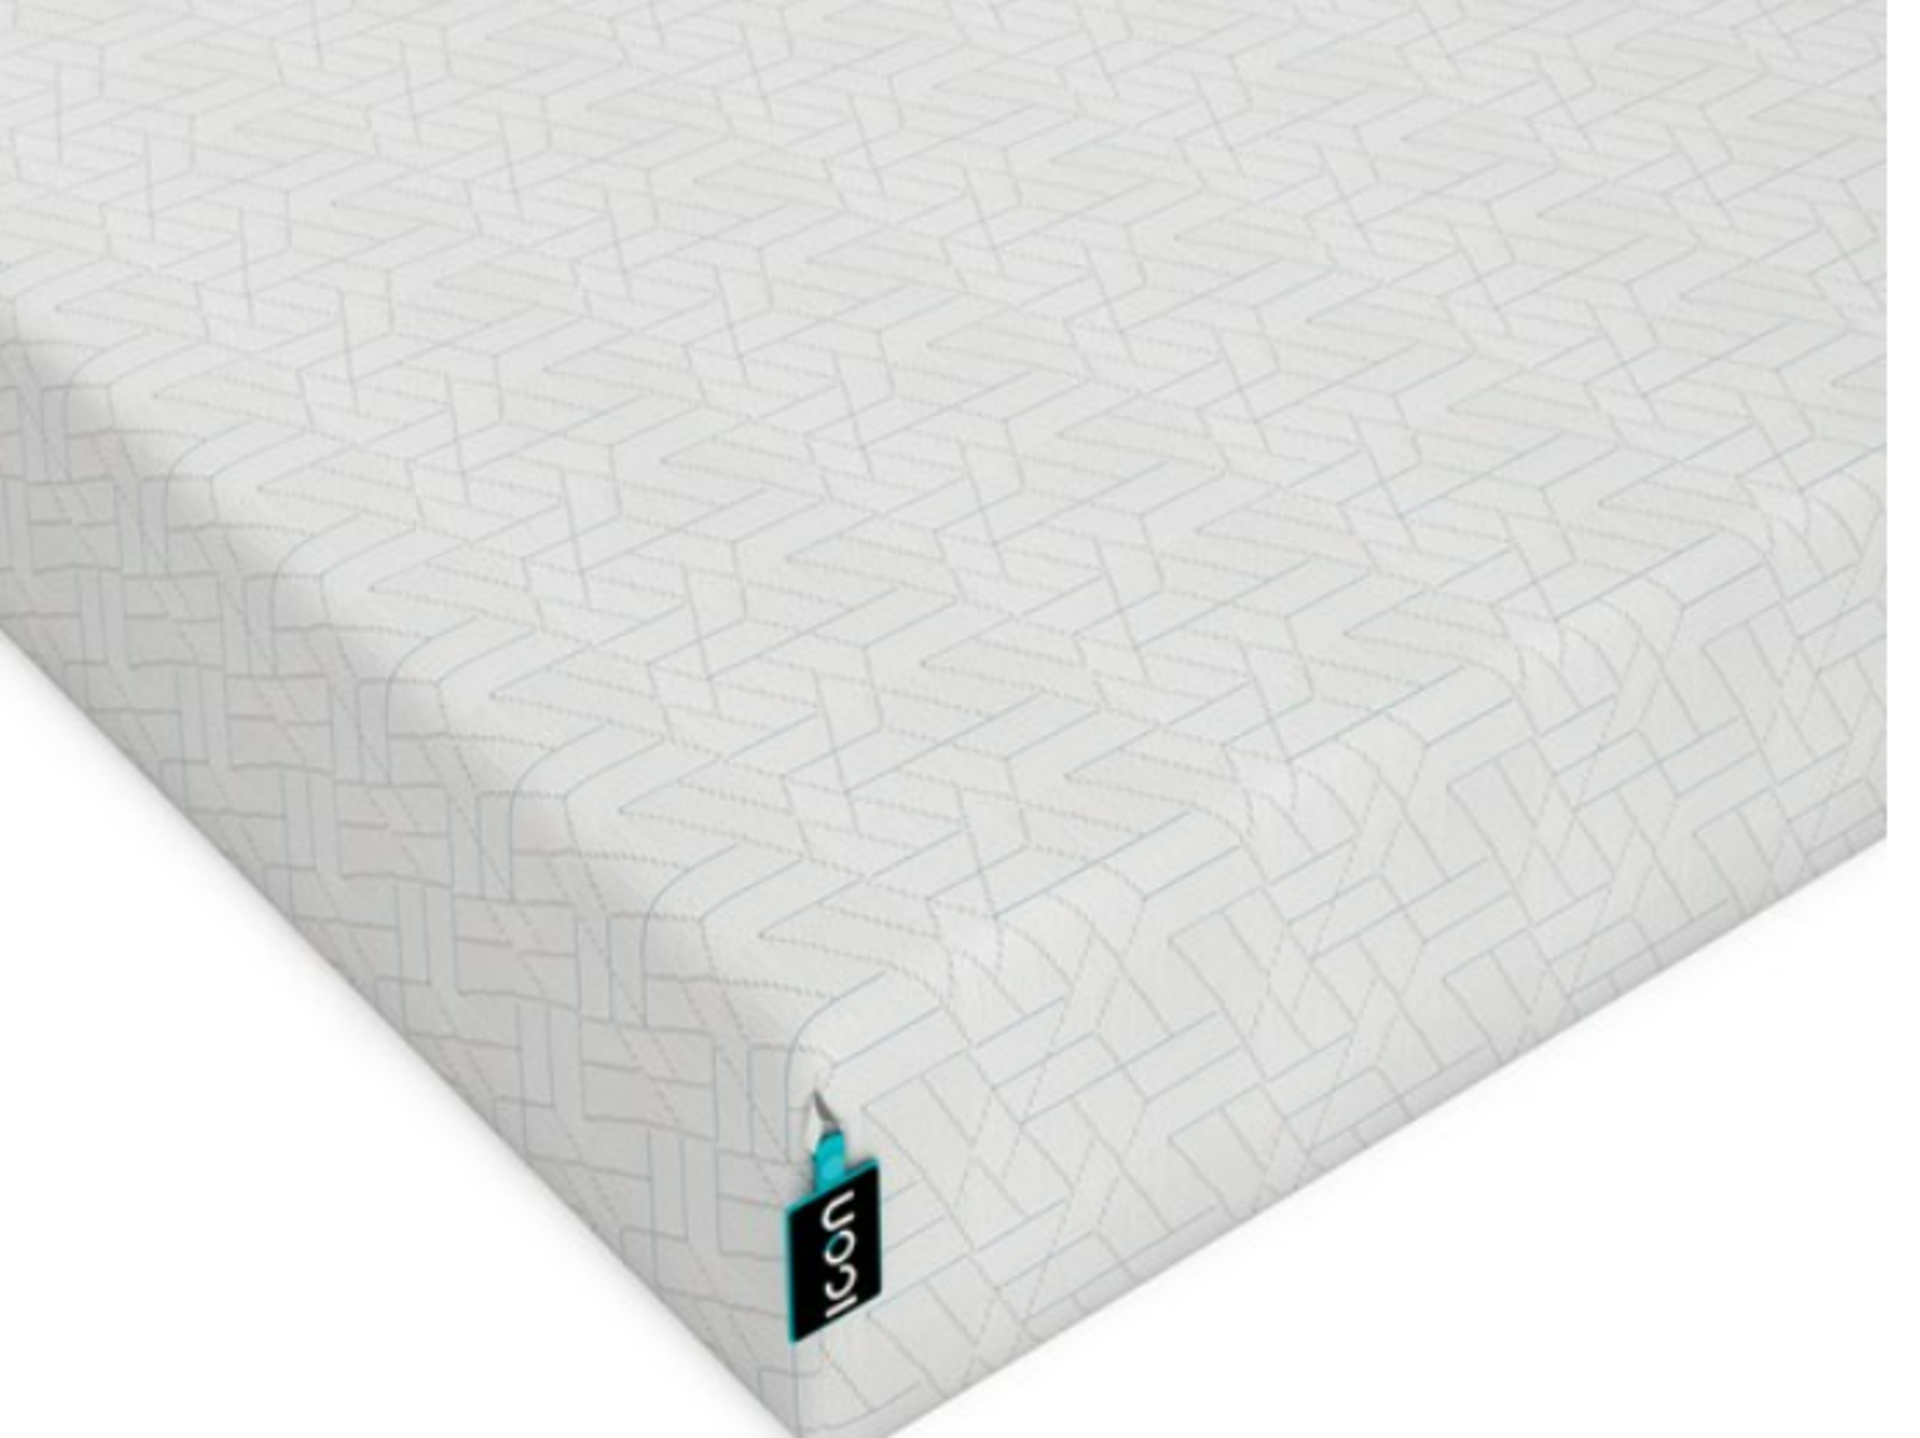 | 1X |  UNIDENTIFIED SINGLE MEMORY FOAM MATTRESS | STILL ROLLED AND BAGGED | RRP £- |